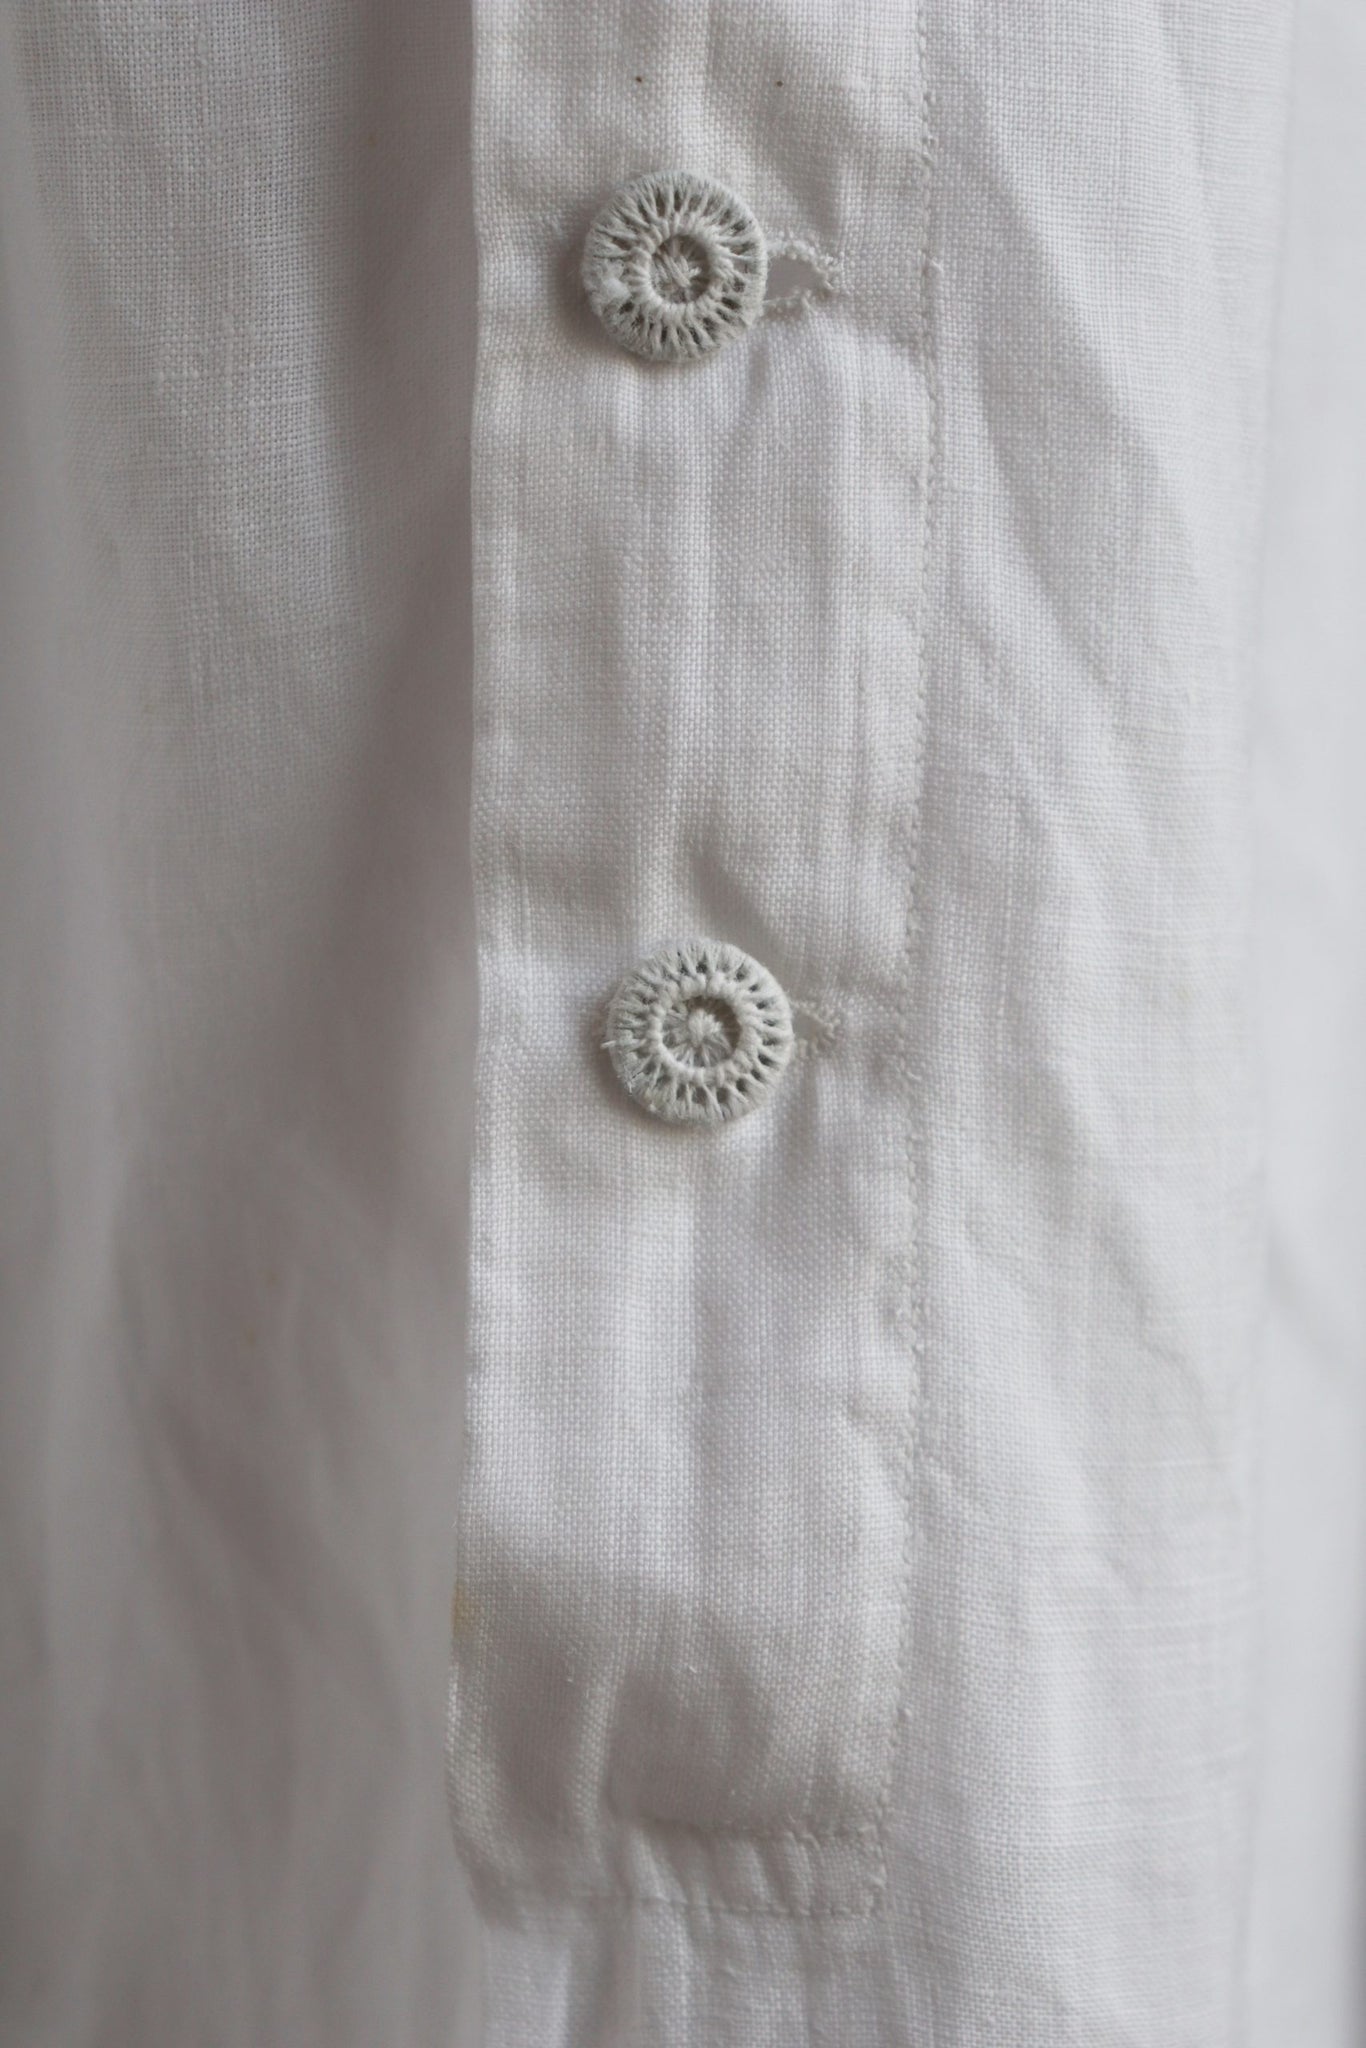 Antique Edwardian White Embroidered Dress